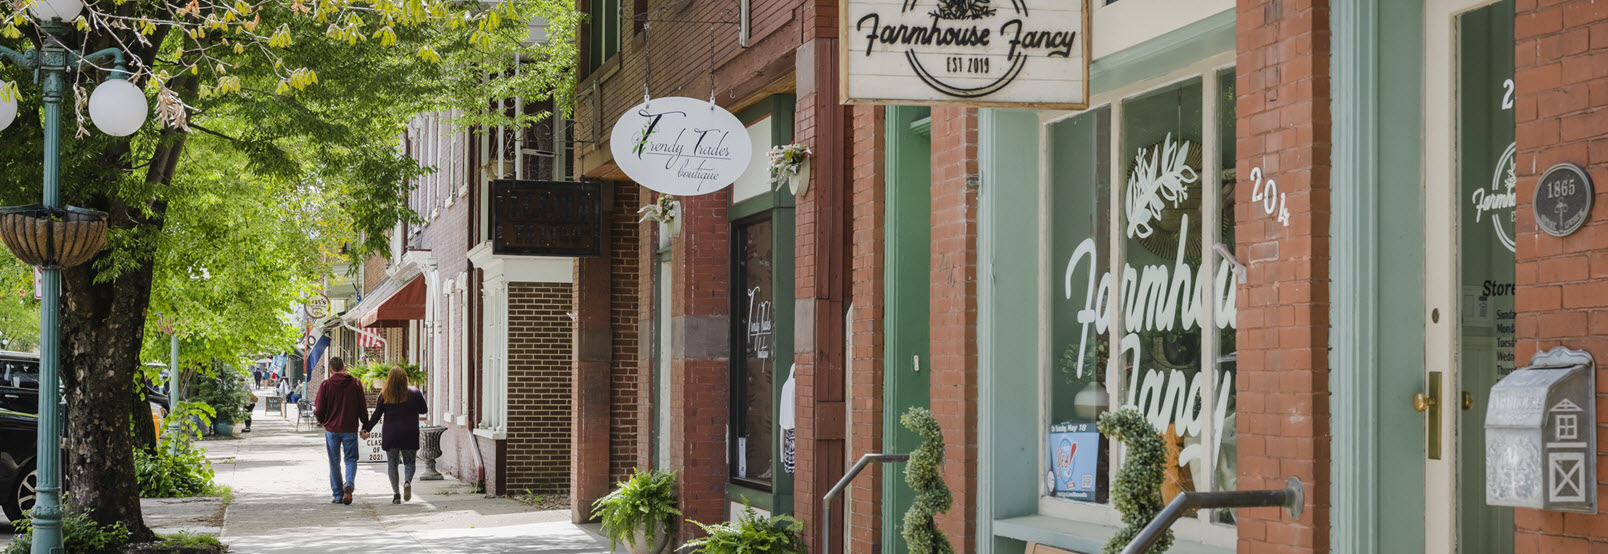 boutiques and shops of historic lewisburg pa